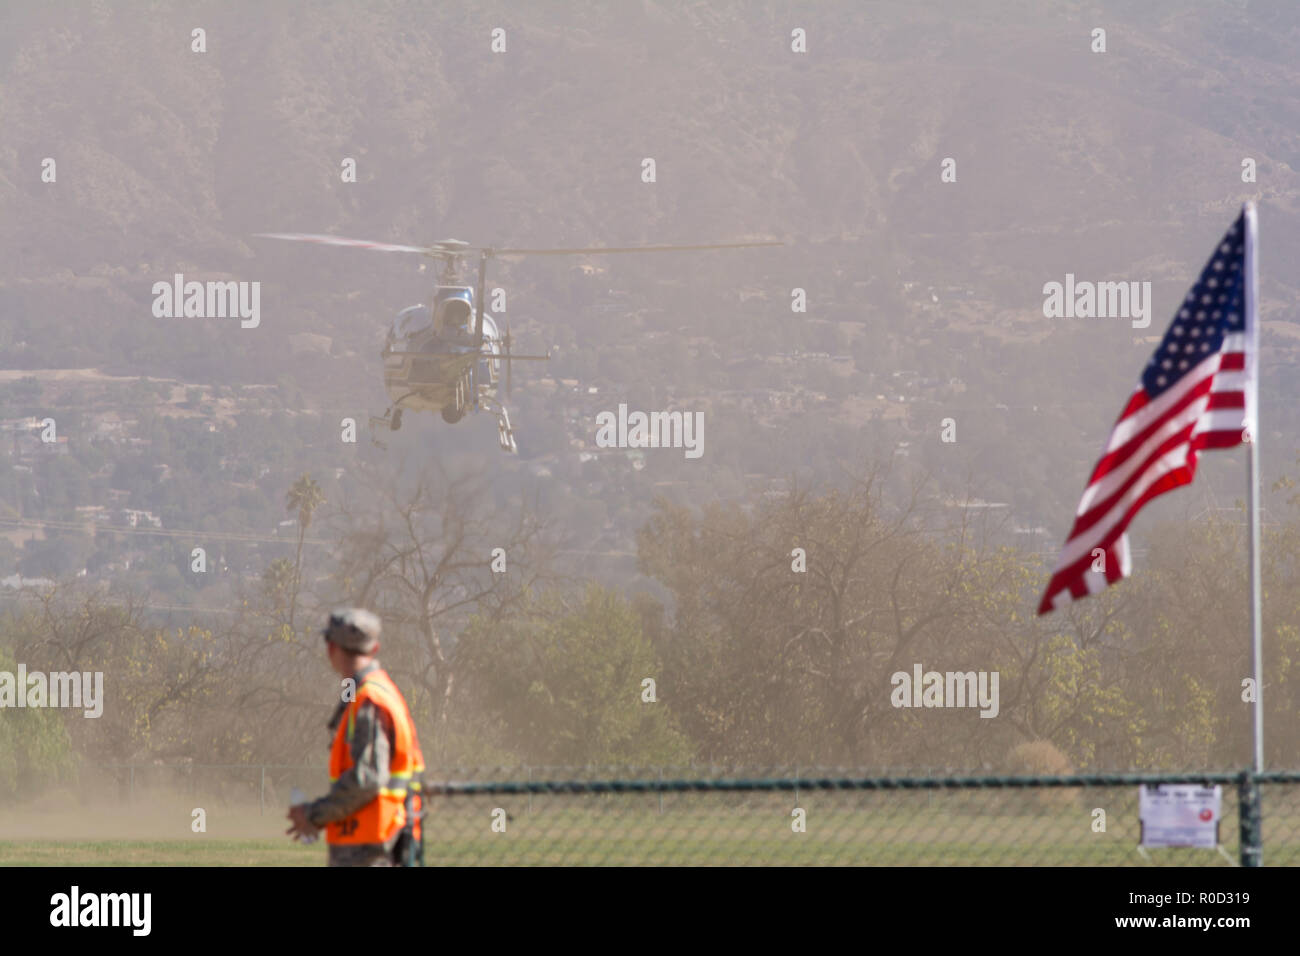 Los Angeles, California USA 3 NOV 2018 California Highway Patrol helicopter taking off in the dust at the American Heroes Airshow in Los Angeles Credit: Chester Brown/Alamy Live News Stock Photo